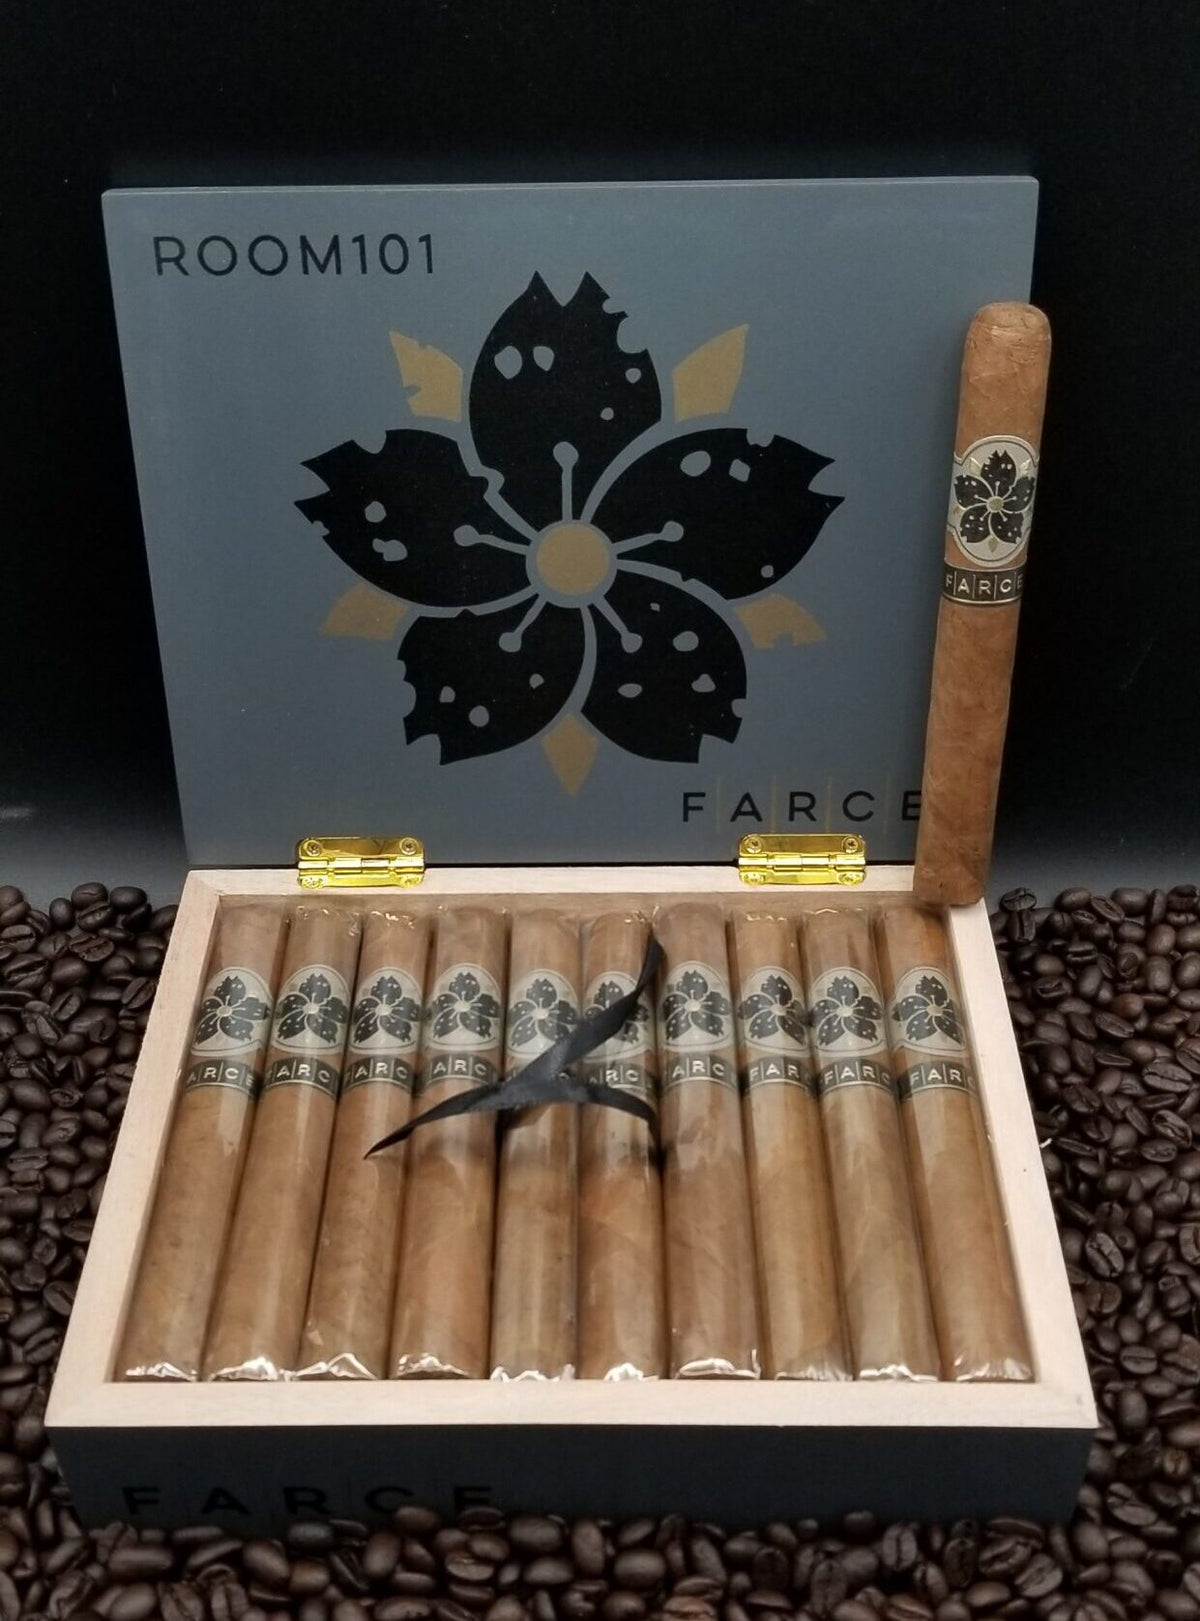 Room 101 Farce Habano Lonsdale cigars supplied by Sir Louis Cigars